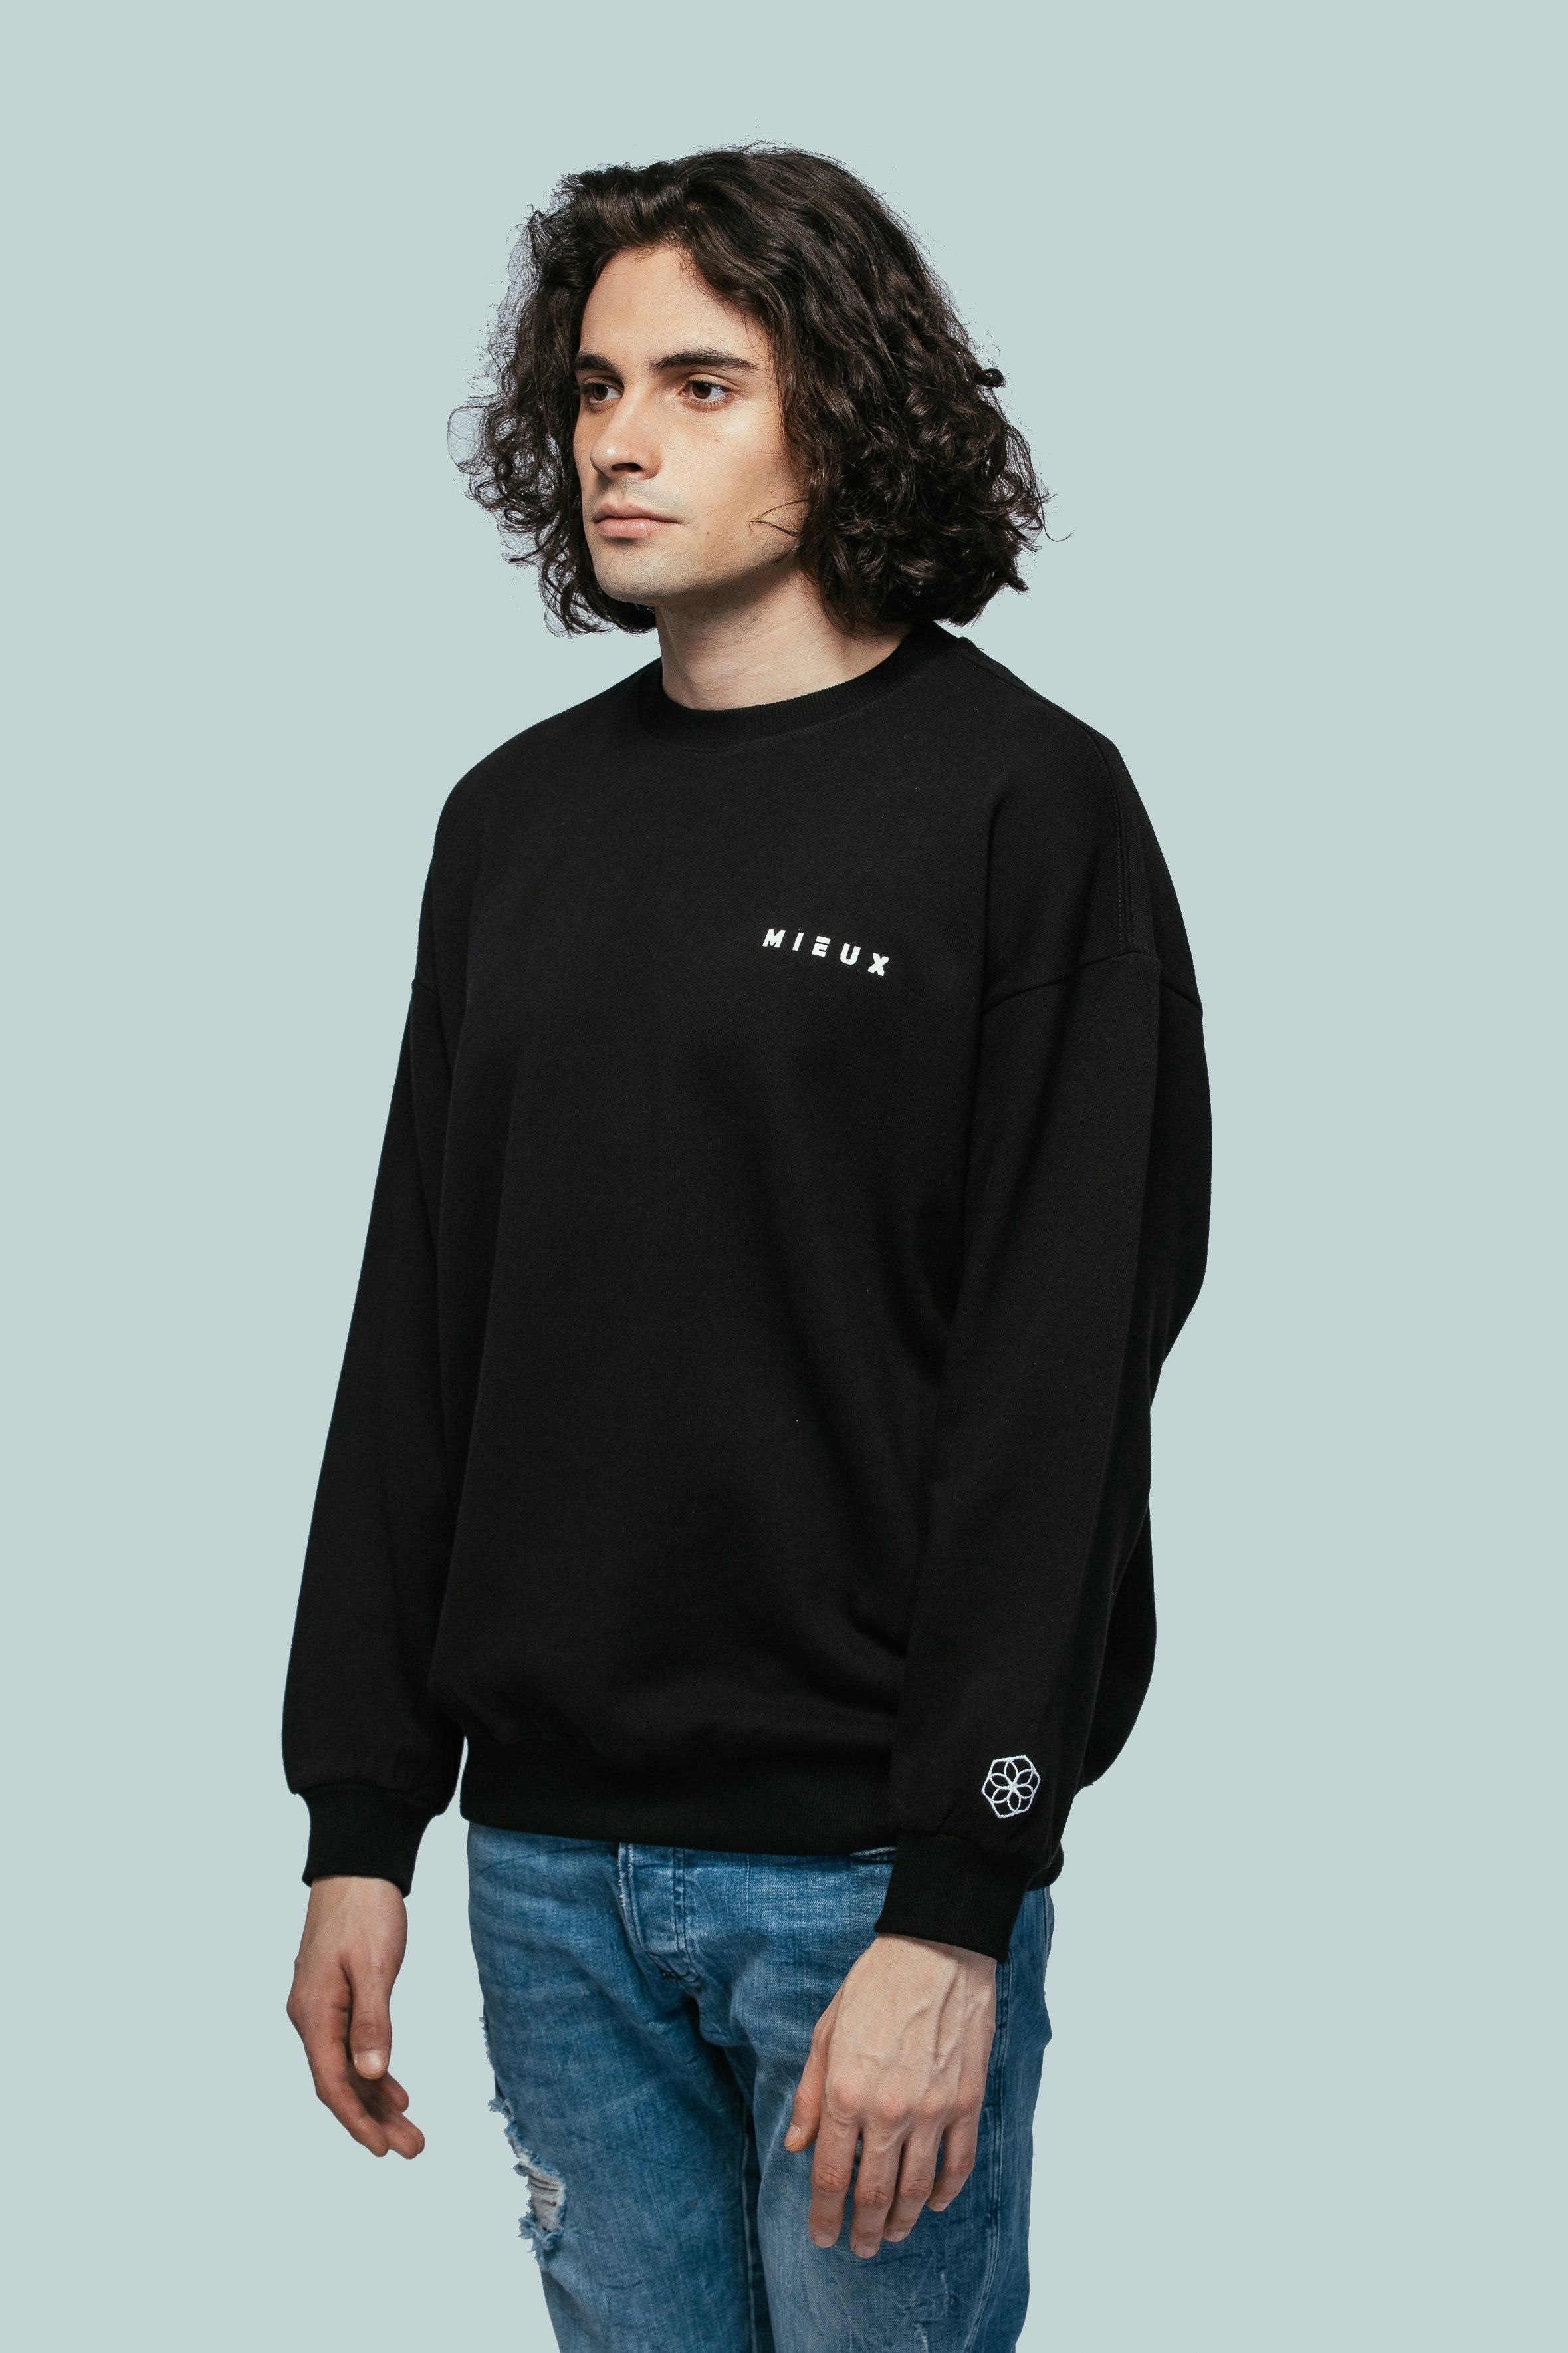 LONG SLEEVE 'MIEUX" SWEATER